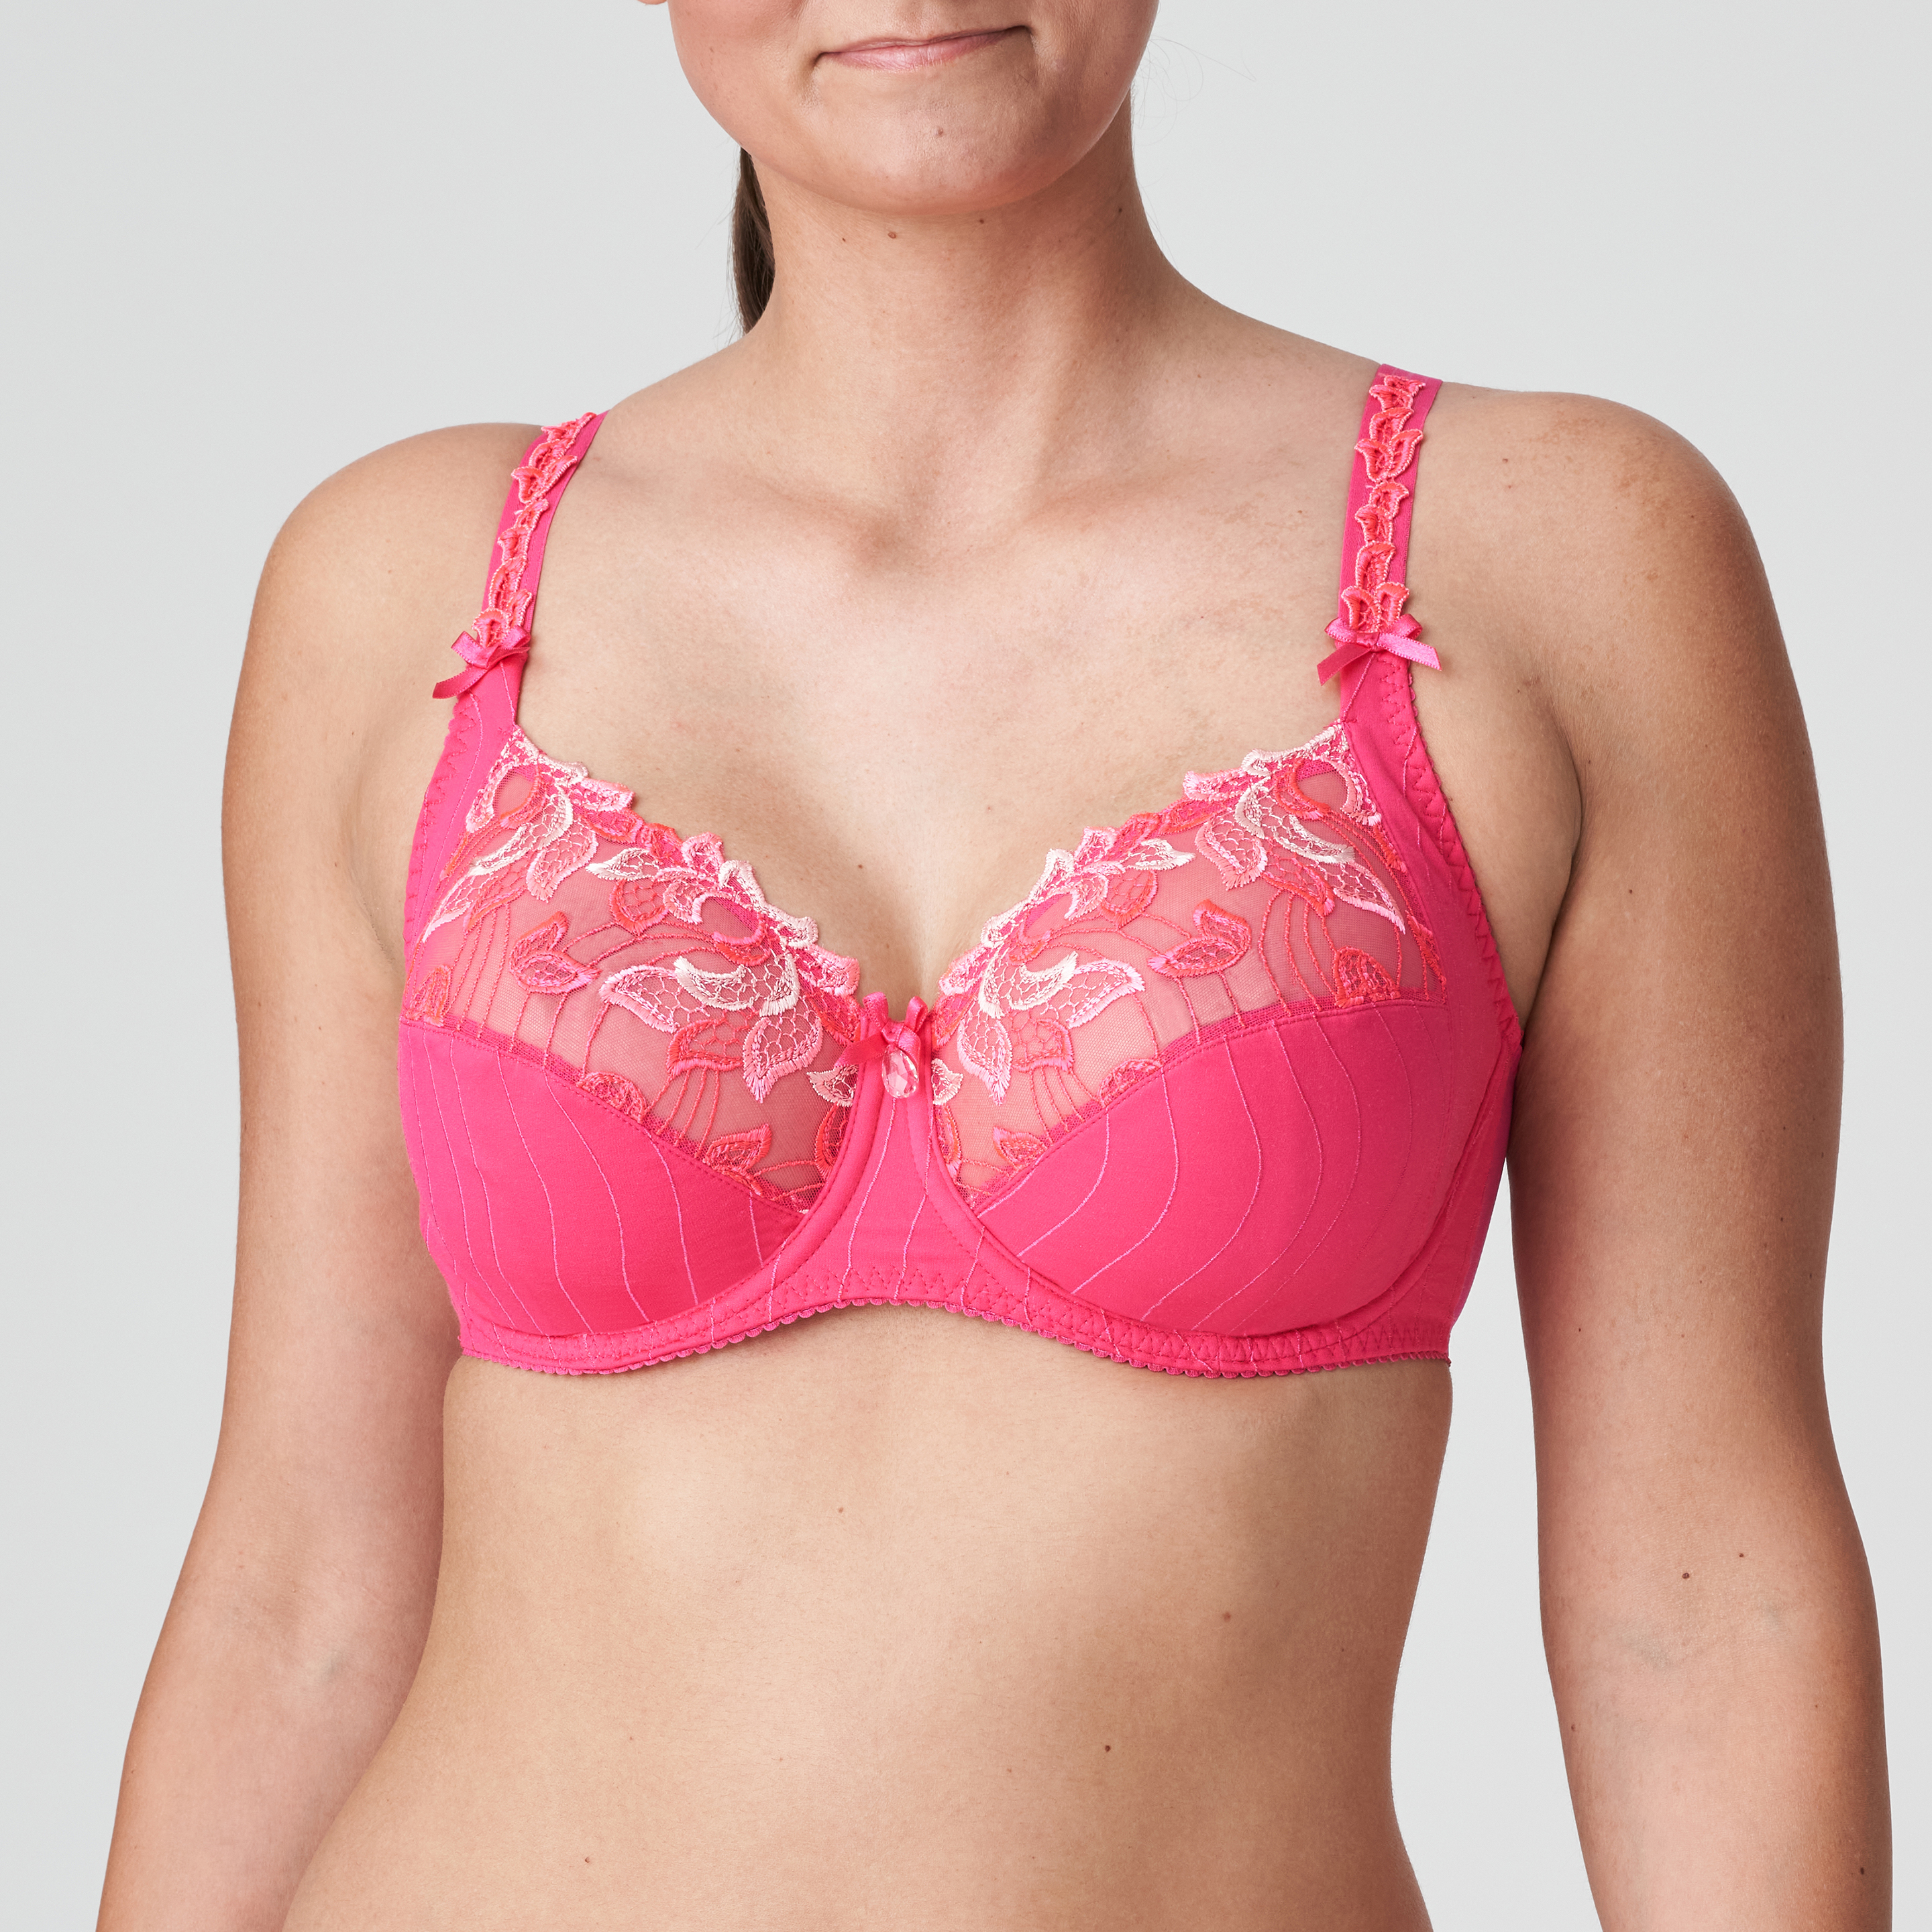 Deauville Vintage Pink Full Cup Bra by Prima Donna